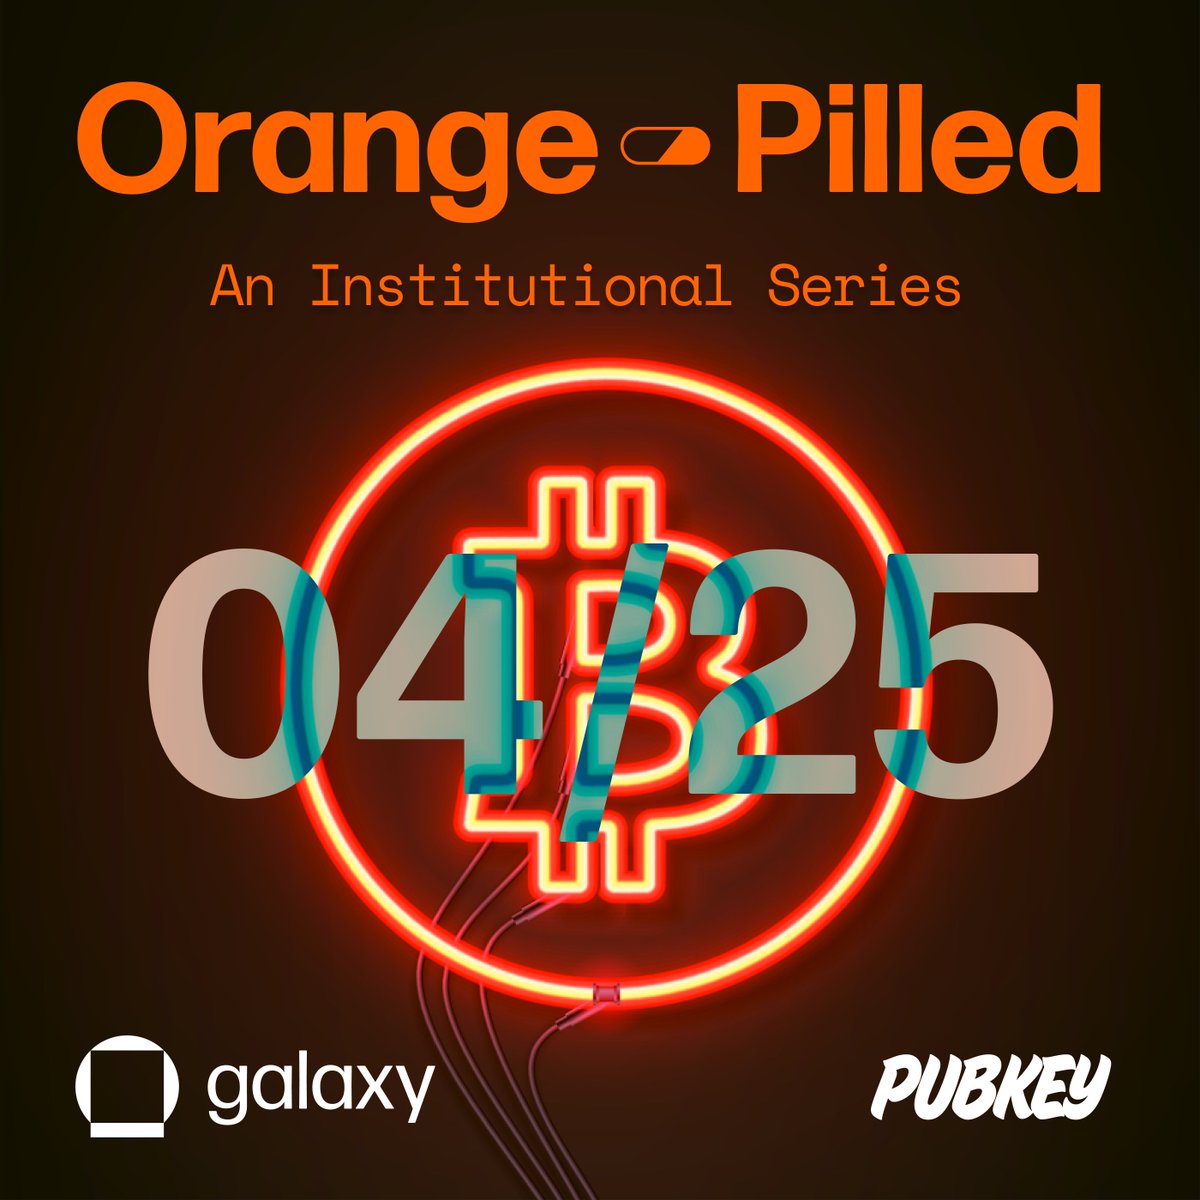 🍊💊 Join us for Edition #3 of Orange-Pilled this Thursday, April 25 at @PubKey_NYC 💊🍊 We'll be having a post-halving discussion around Bitcoin mining economics with Andrew Bond (@RBLTSecurities), @tpacchia (@PubKey_NYC), @austorms (@galaxyhq), and @brian_wright21 (@galaxyhq).…